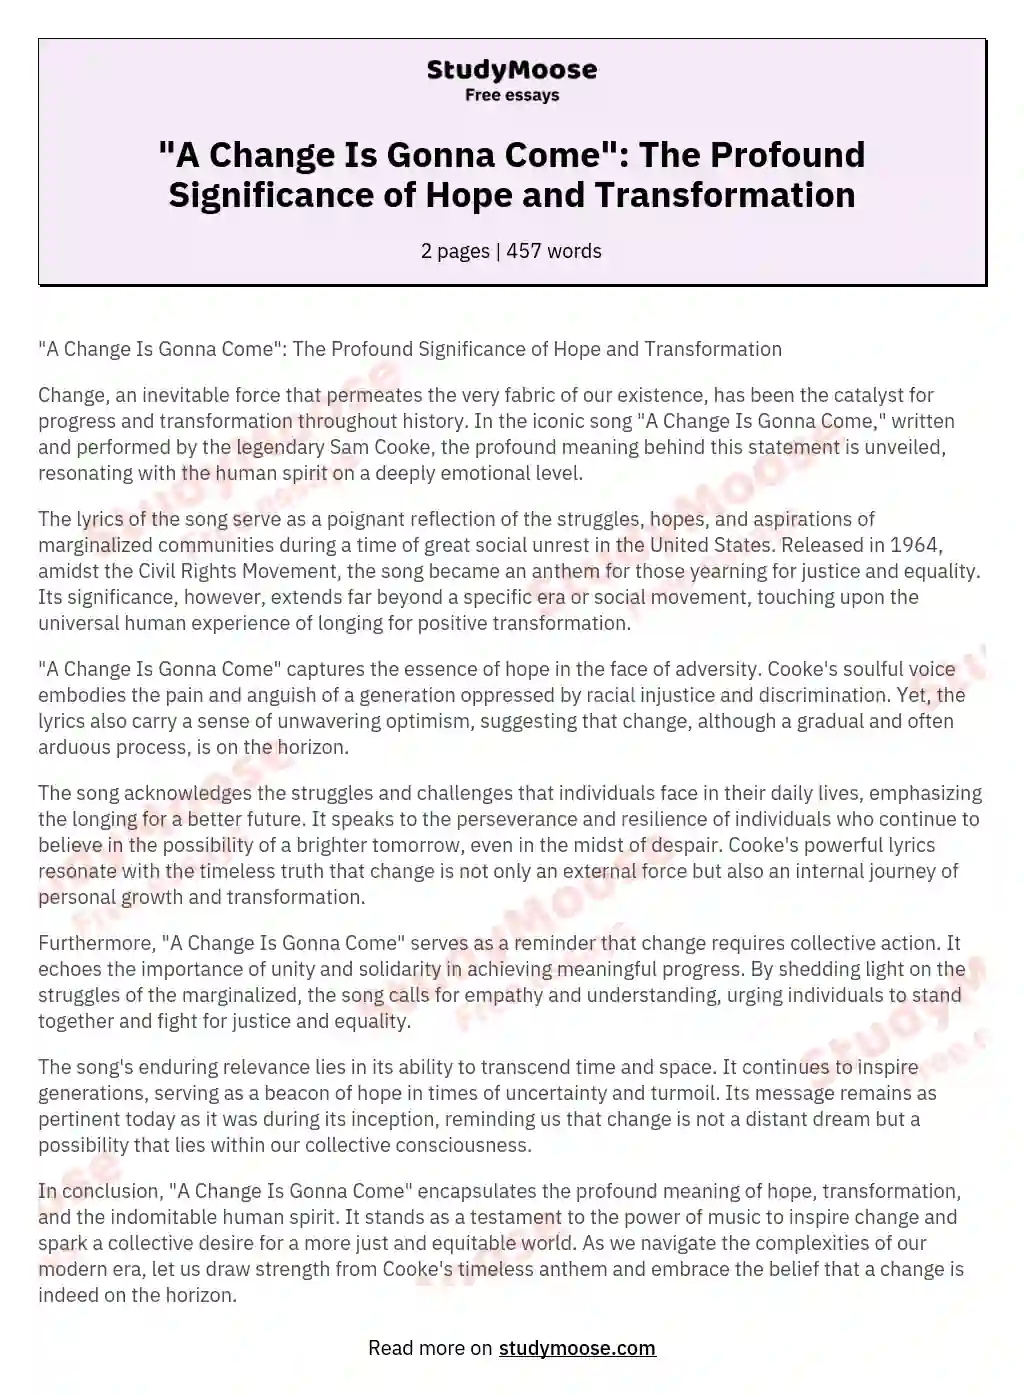 "A Change Is Gonna Come": The Profound Significance of Hope and Transformation essay